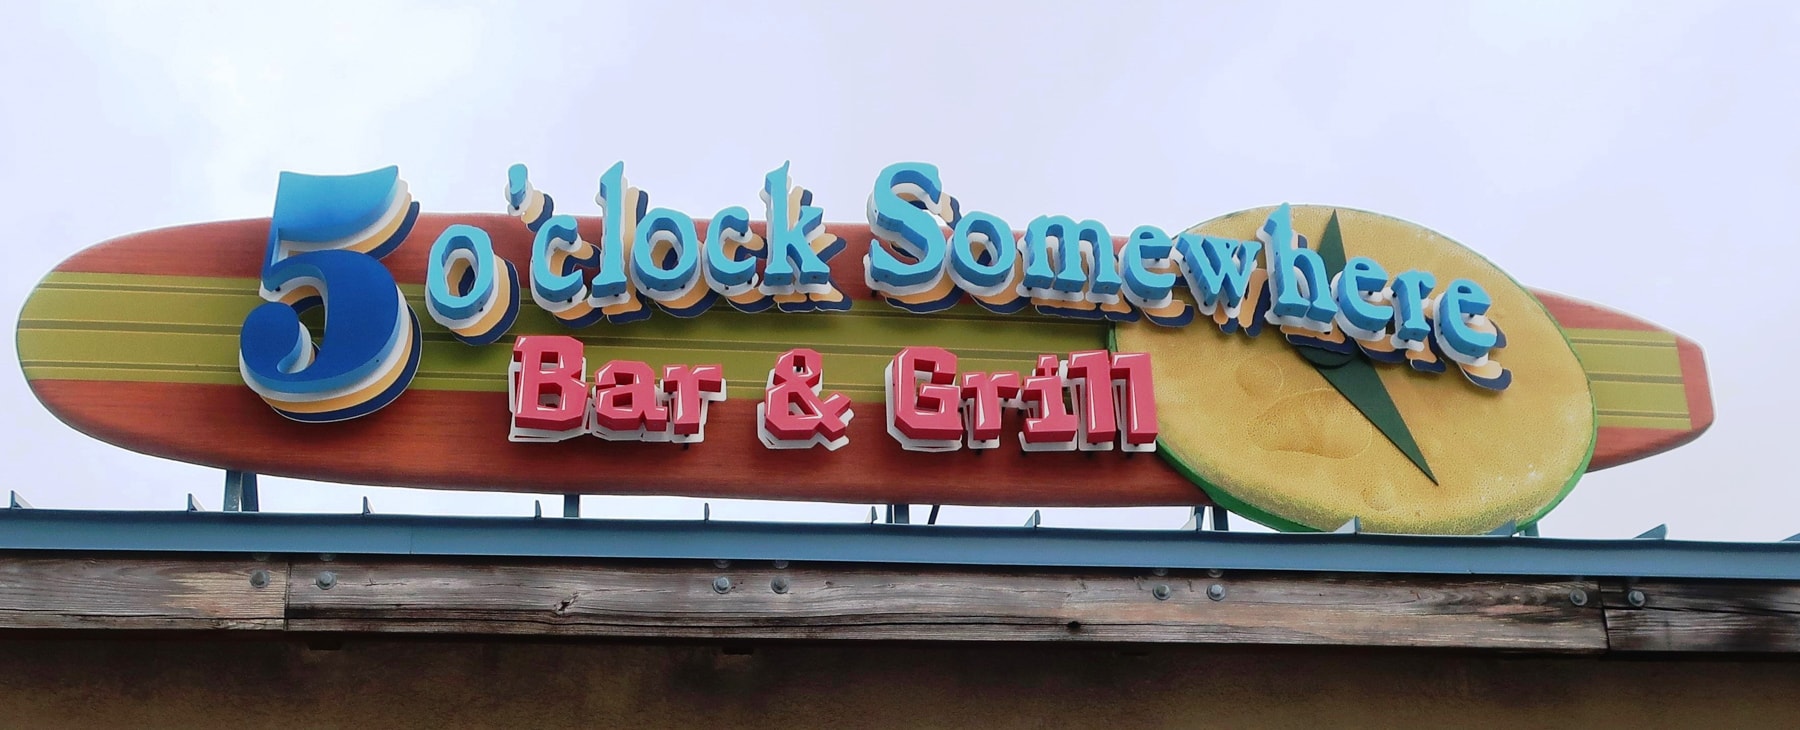 It’s 5 O’Clock Somewhere is a welcome mantra both as a theory as well as an actual bar – this one in Hollywood, Florida